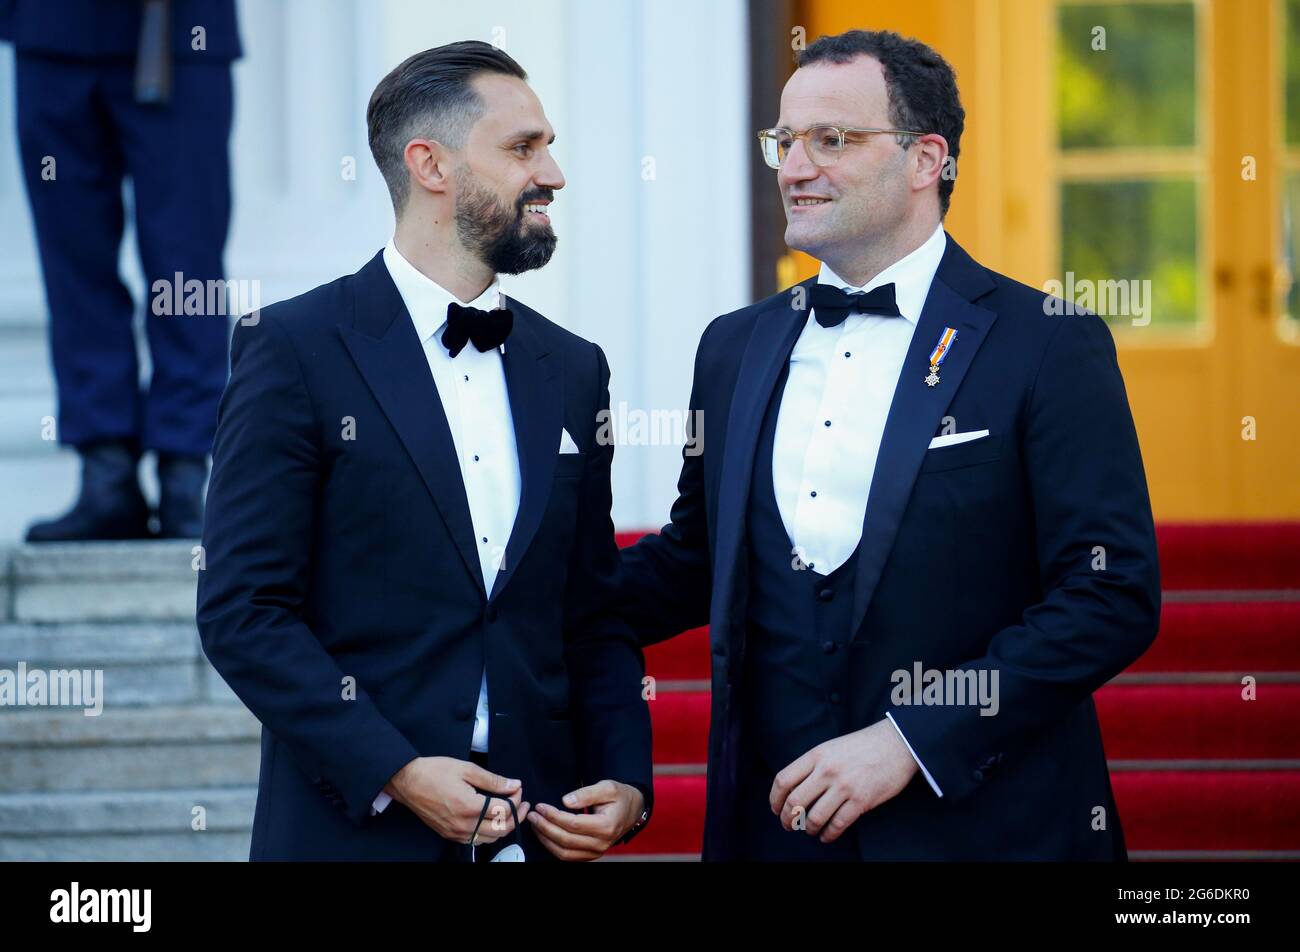 German Health Minister Jens Spahn and his partner Daniel Funke arrive at  Bellevue Palace in Berlin, Germany, July 5, 2021. REUTERS/Michele Tantussi  REFILE - CORRECTING YEAR Stock Photo - Alamy